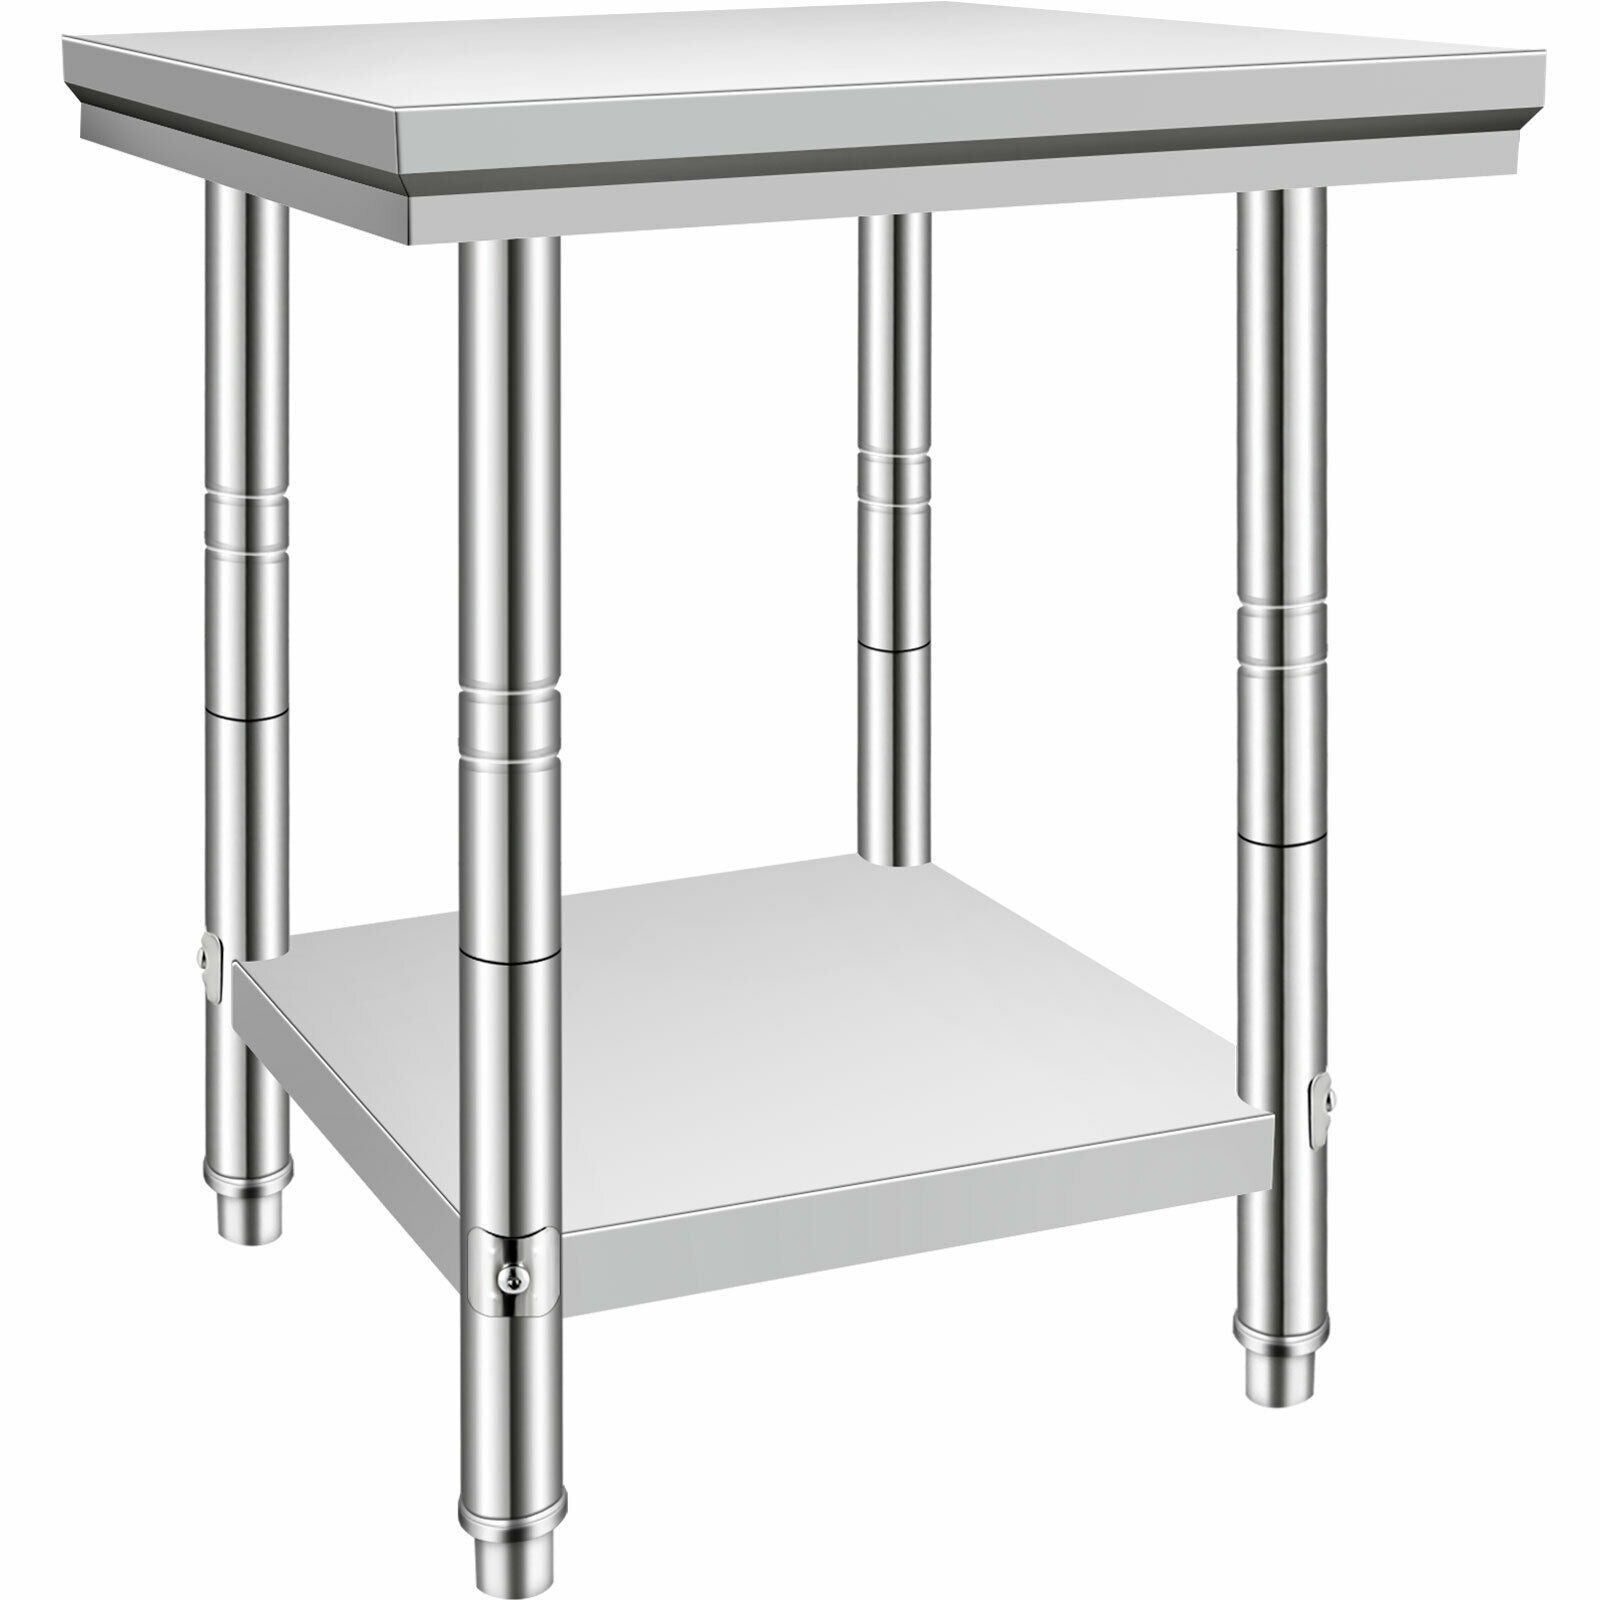 Stainless Steel Commercial Kitchen Bench Table - 610x610mm